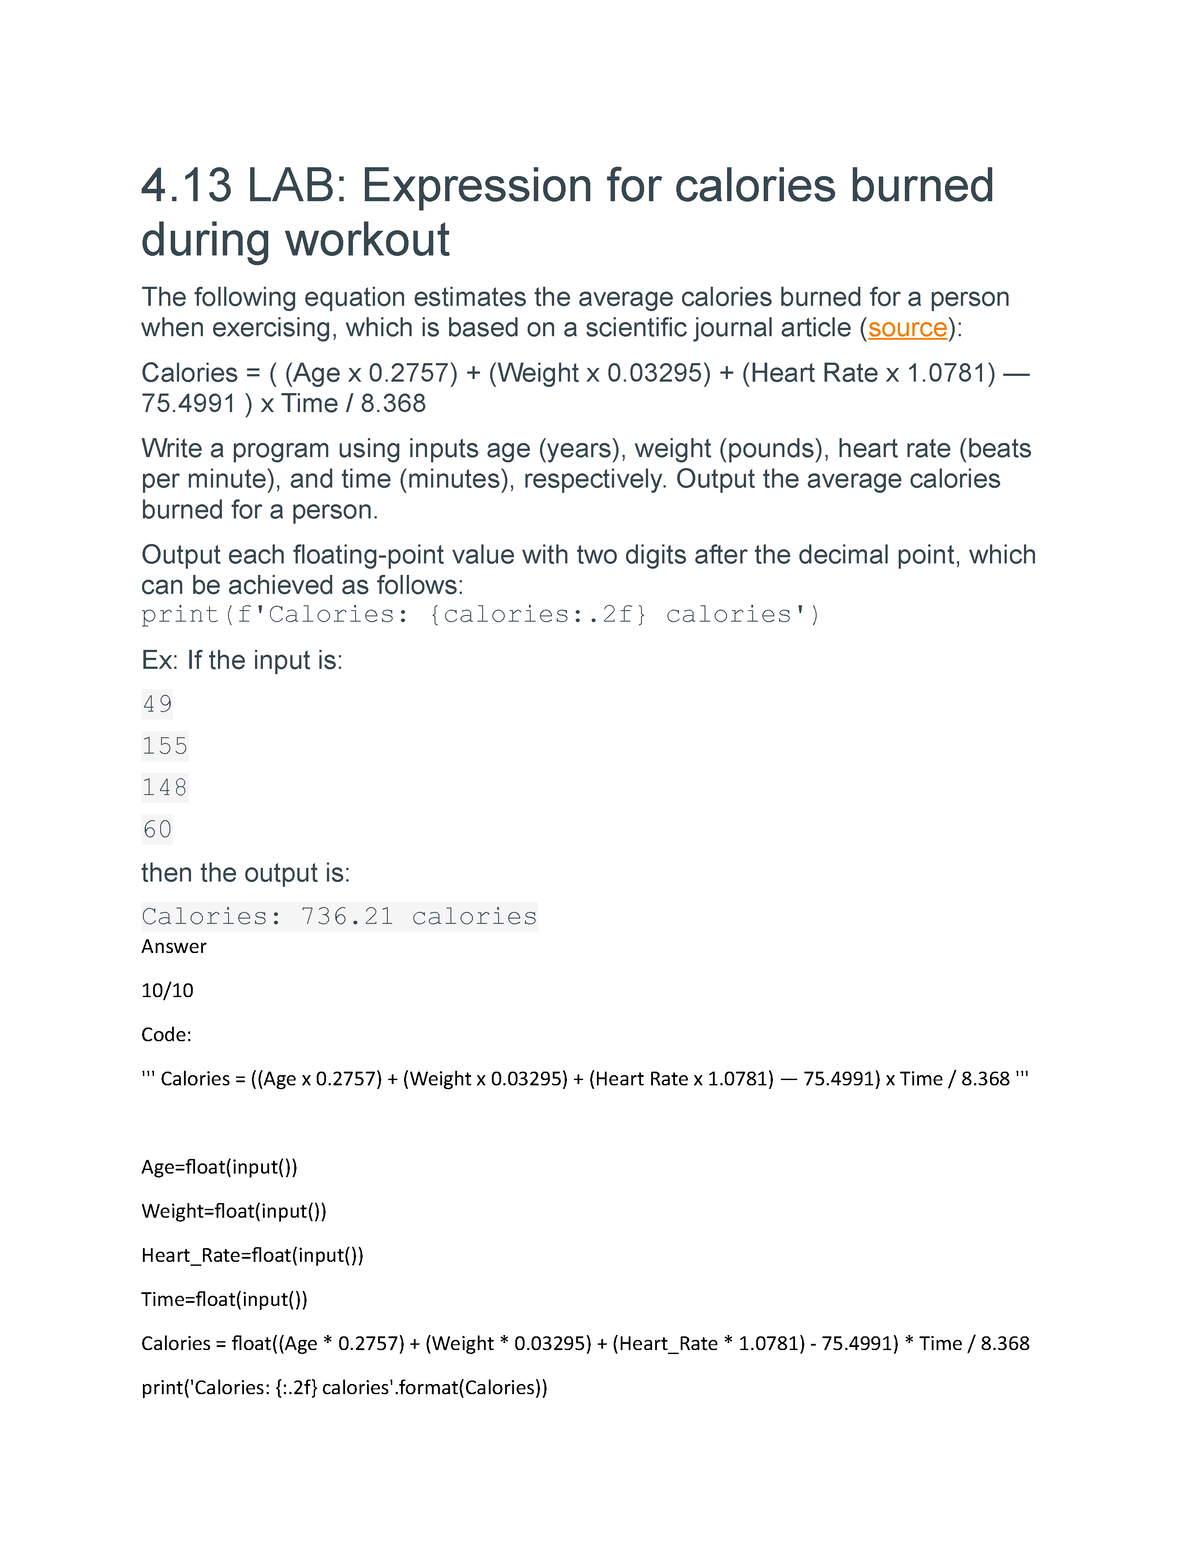 expression for calories burned during workout